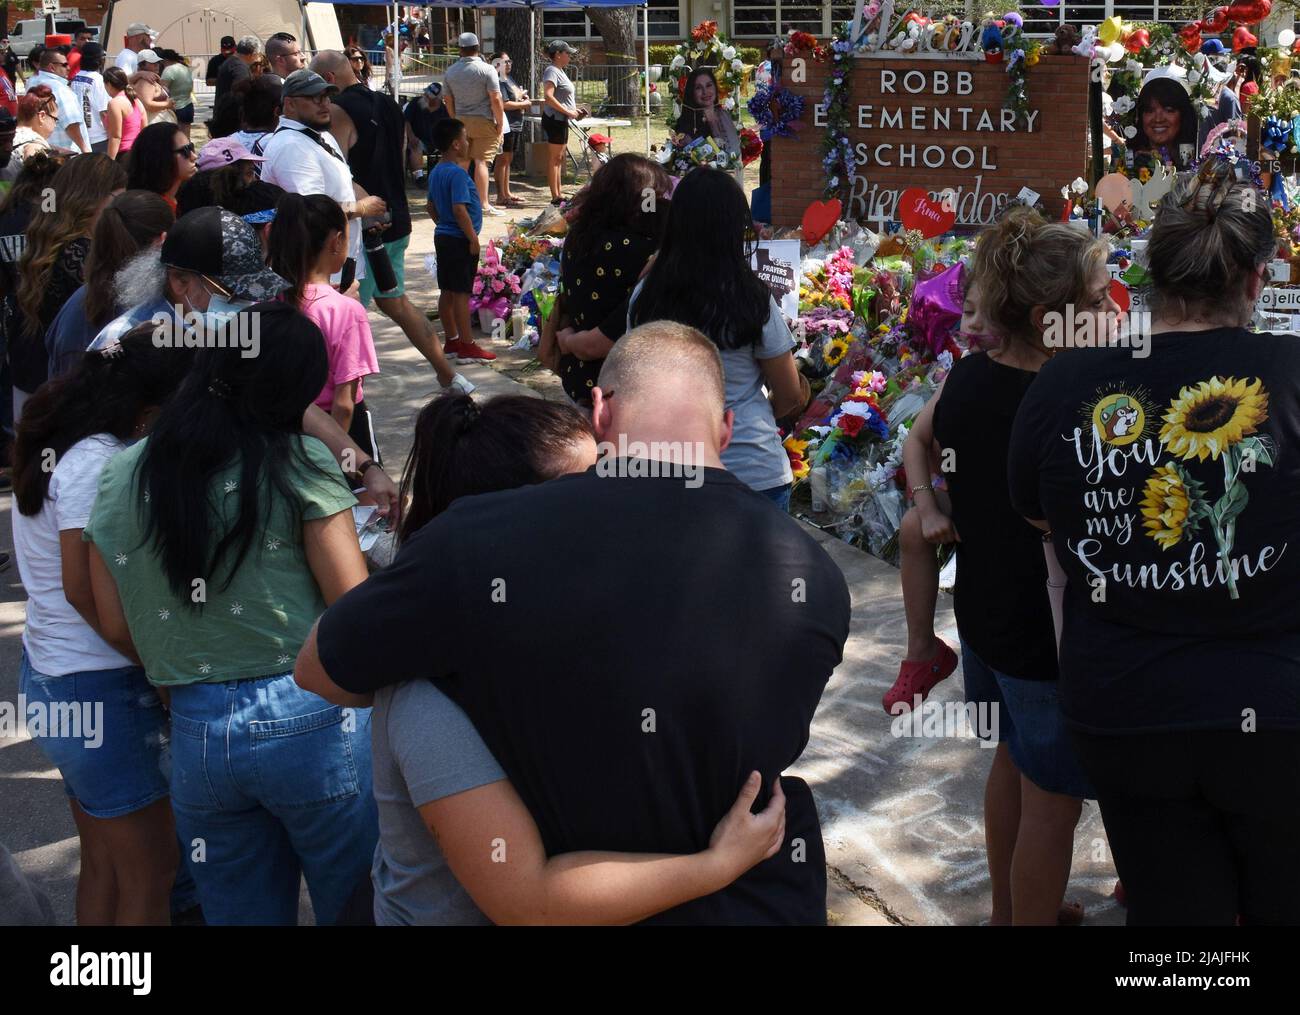 Uvalde, United States. 30th May, 2022. Mourners gather at a memorial of flowers at Robb Elementary School in Uvalde, Texas on Monday, May 30, 2022. A mass shooting days before left 19 children and two adults dead at the elementary school. Photo by Jon Farina/UPI Credit: UPI/Alamy Live News Stock Photo